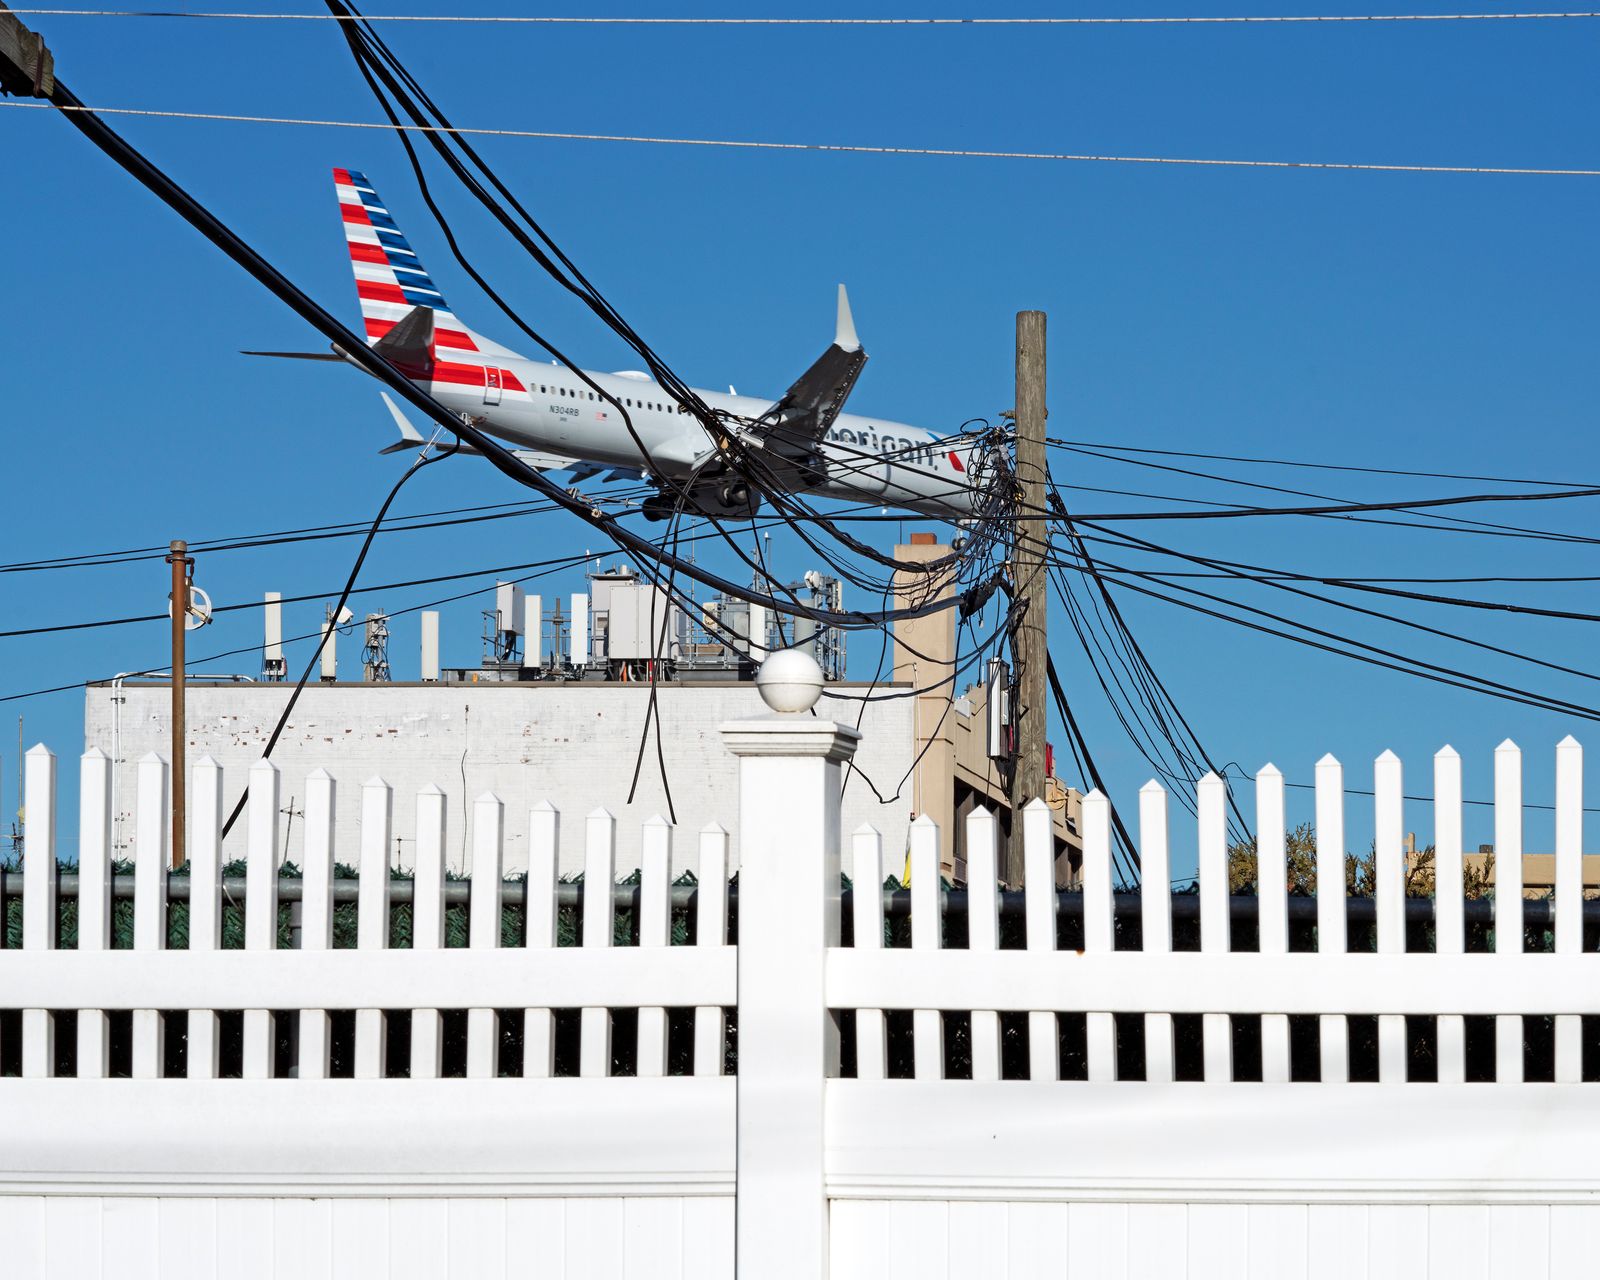 © David Rothenberg - Wires and Fence (Miami Intl to LaGuardia)